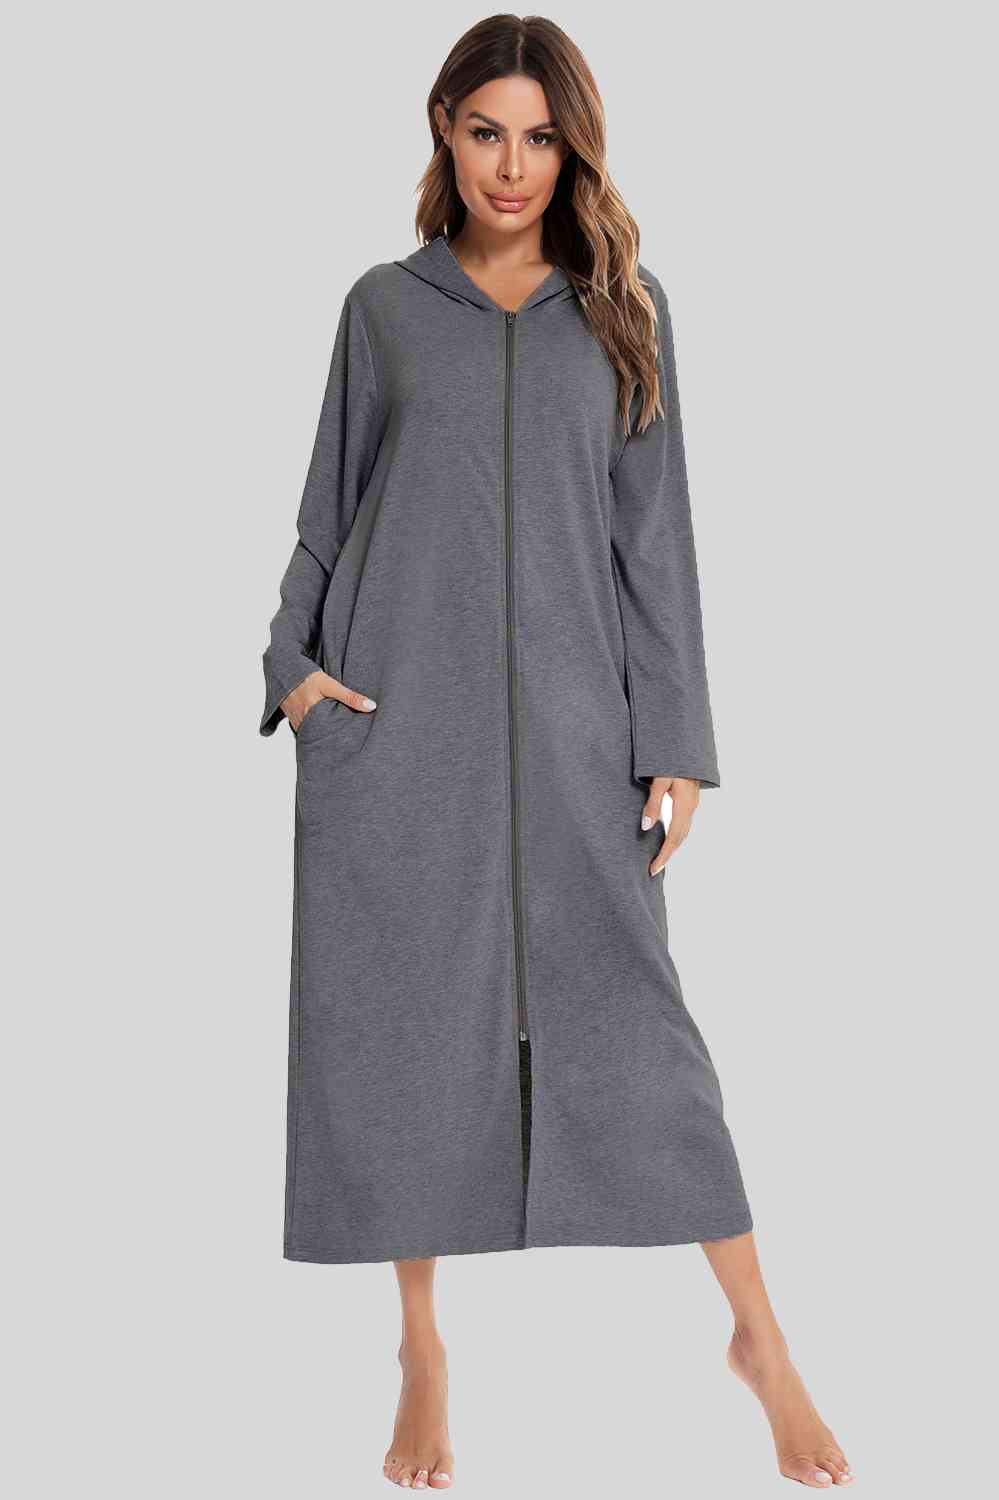 Zip Front Hooded Night Dress with Pockets Charcoal